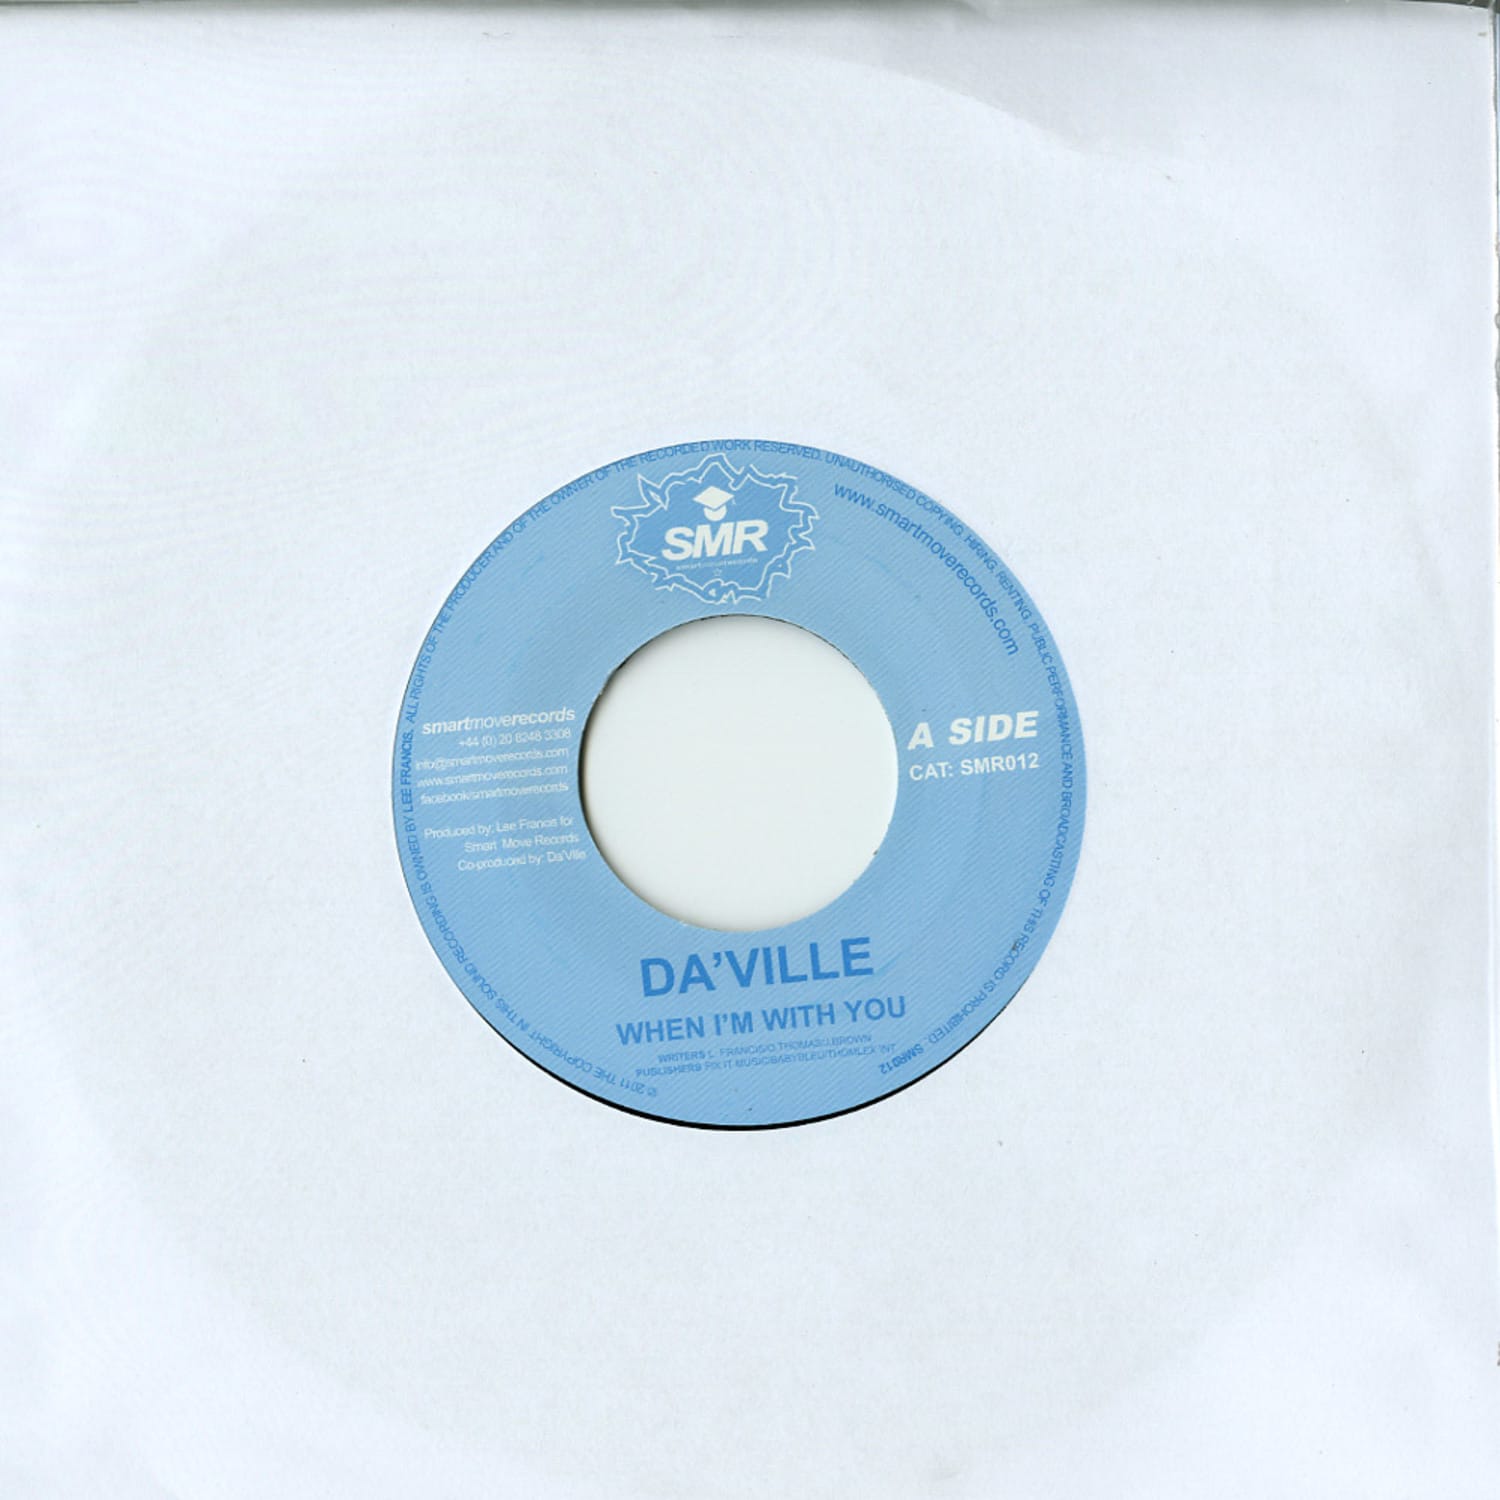 Da Ville / Shyam Moses - WHEN I M WITH YOU / WANNA BE BY YOUR SIDE 